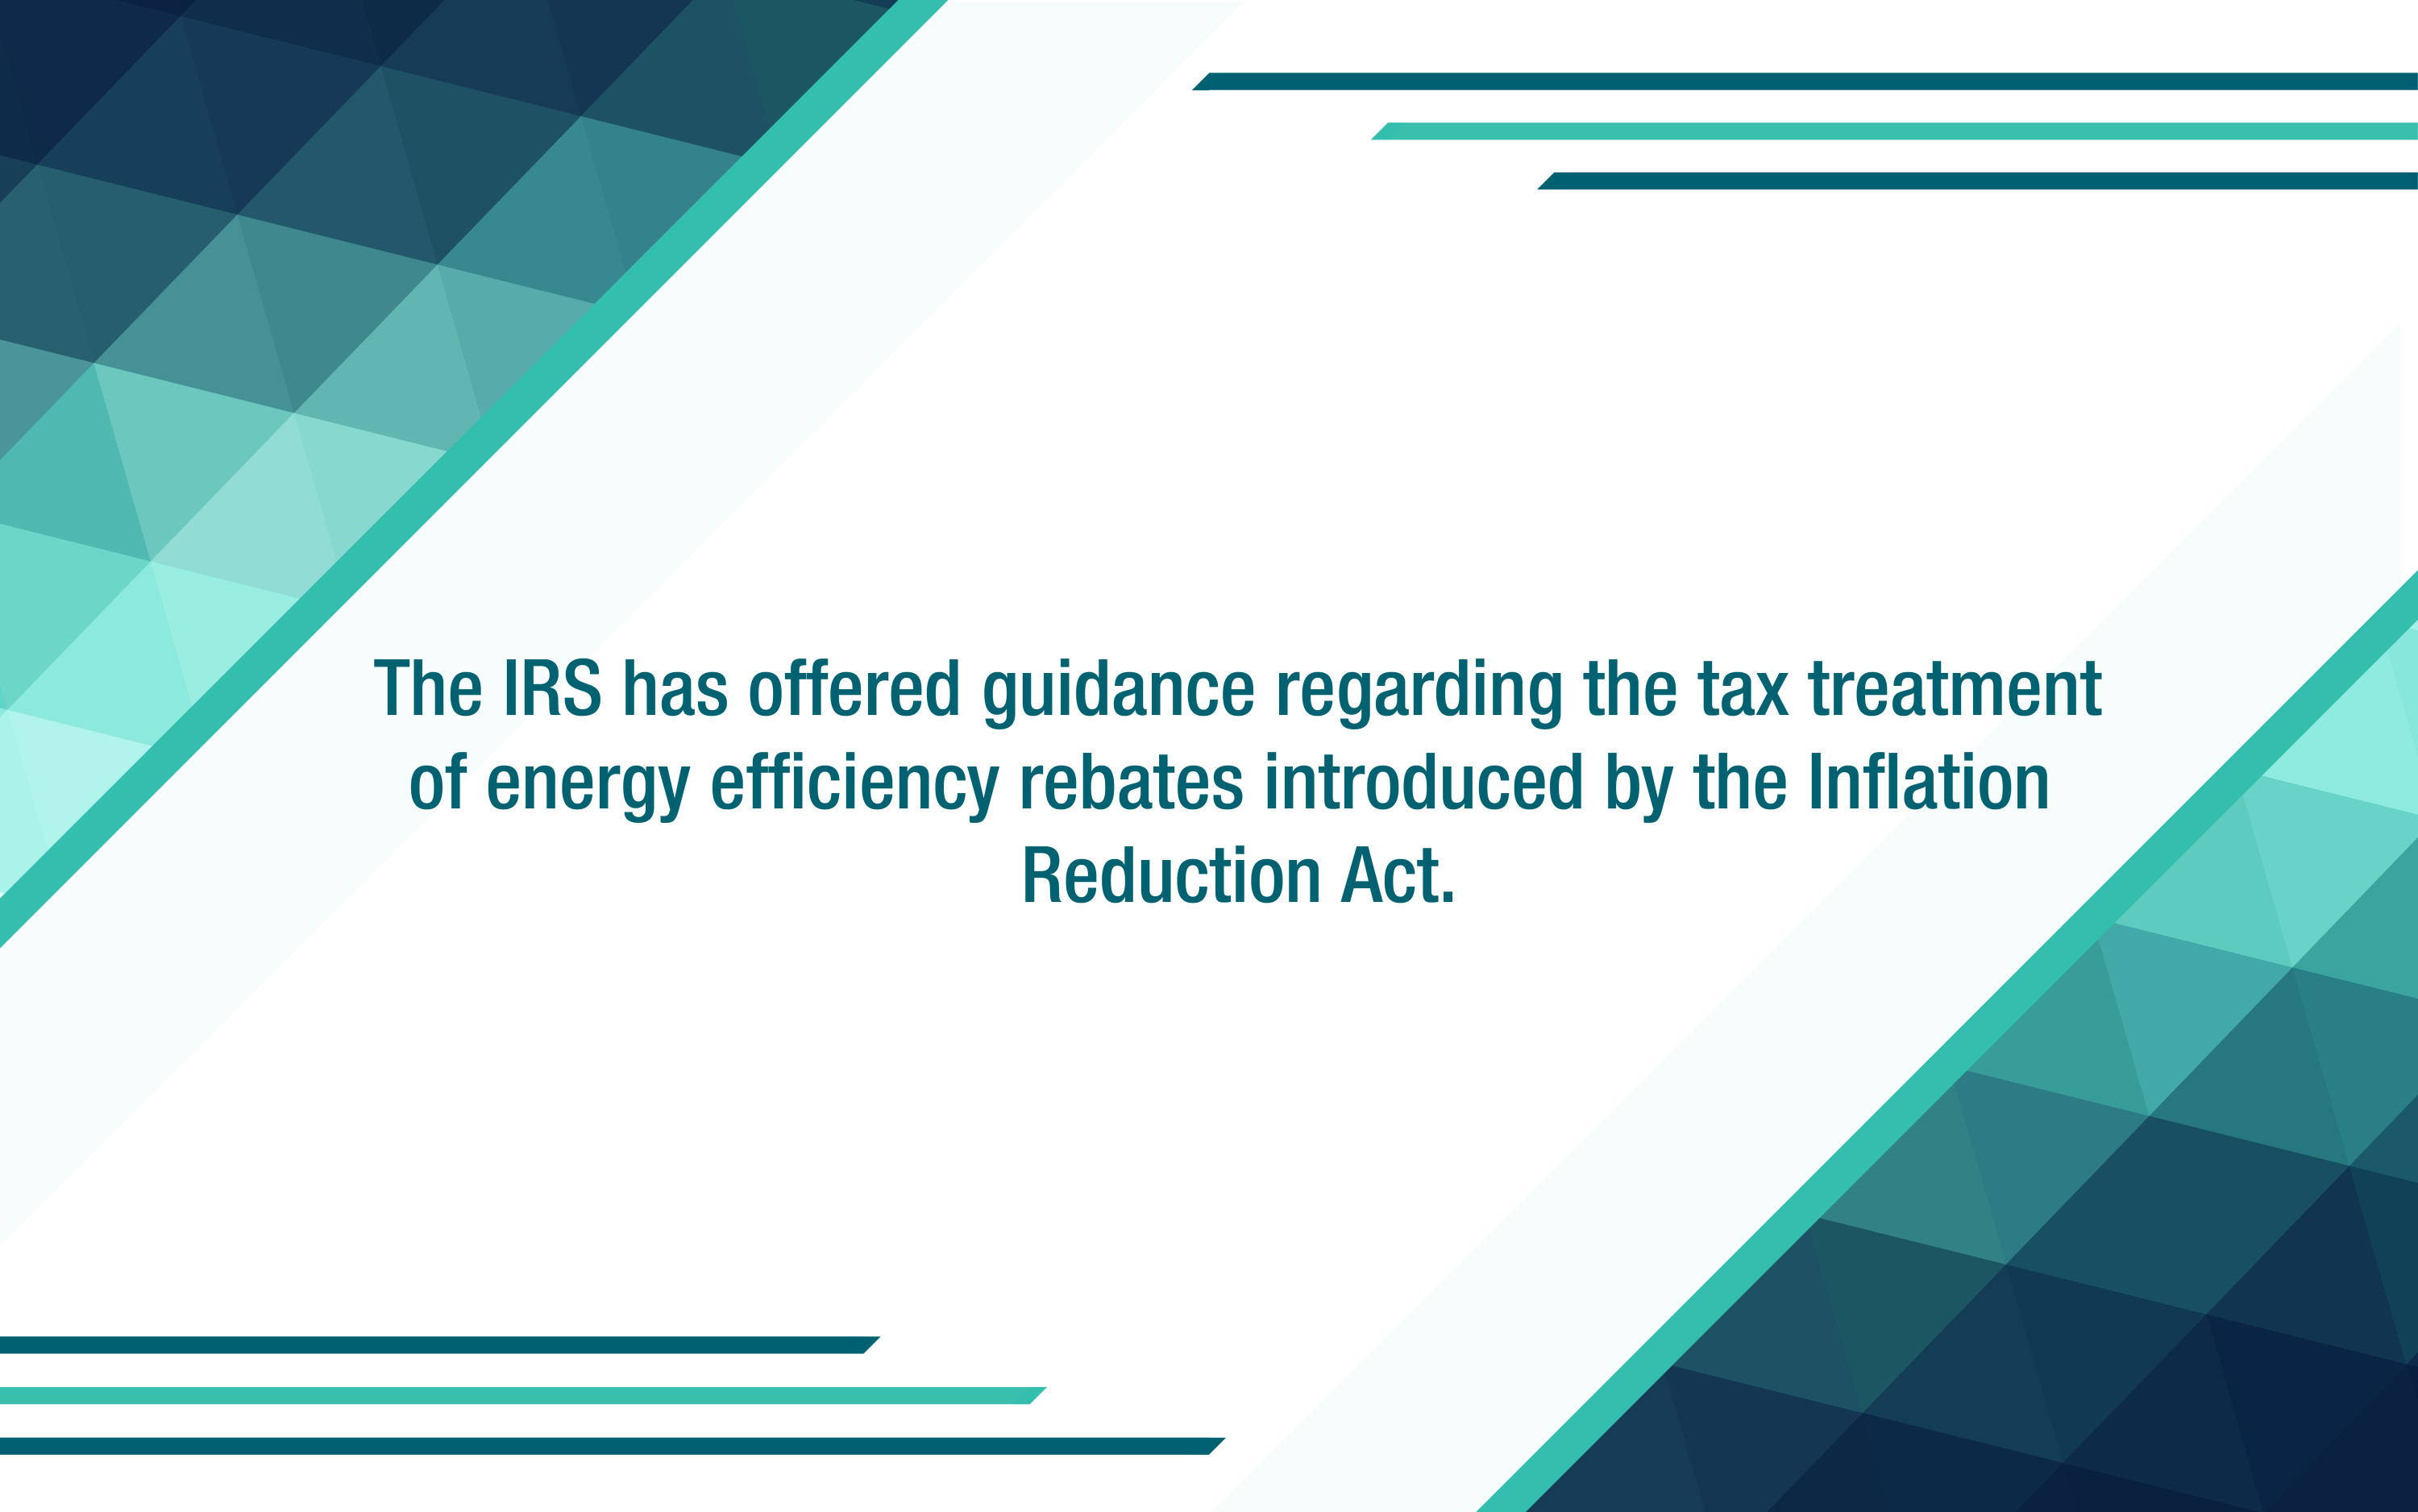 IRS issues guidance on tax treatment of energy efficiency rebates